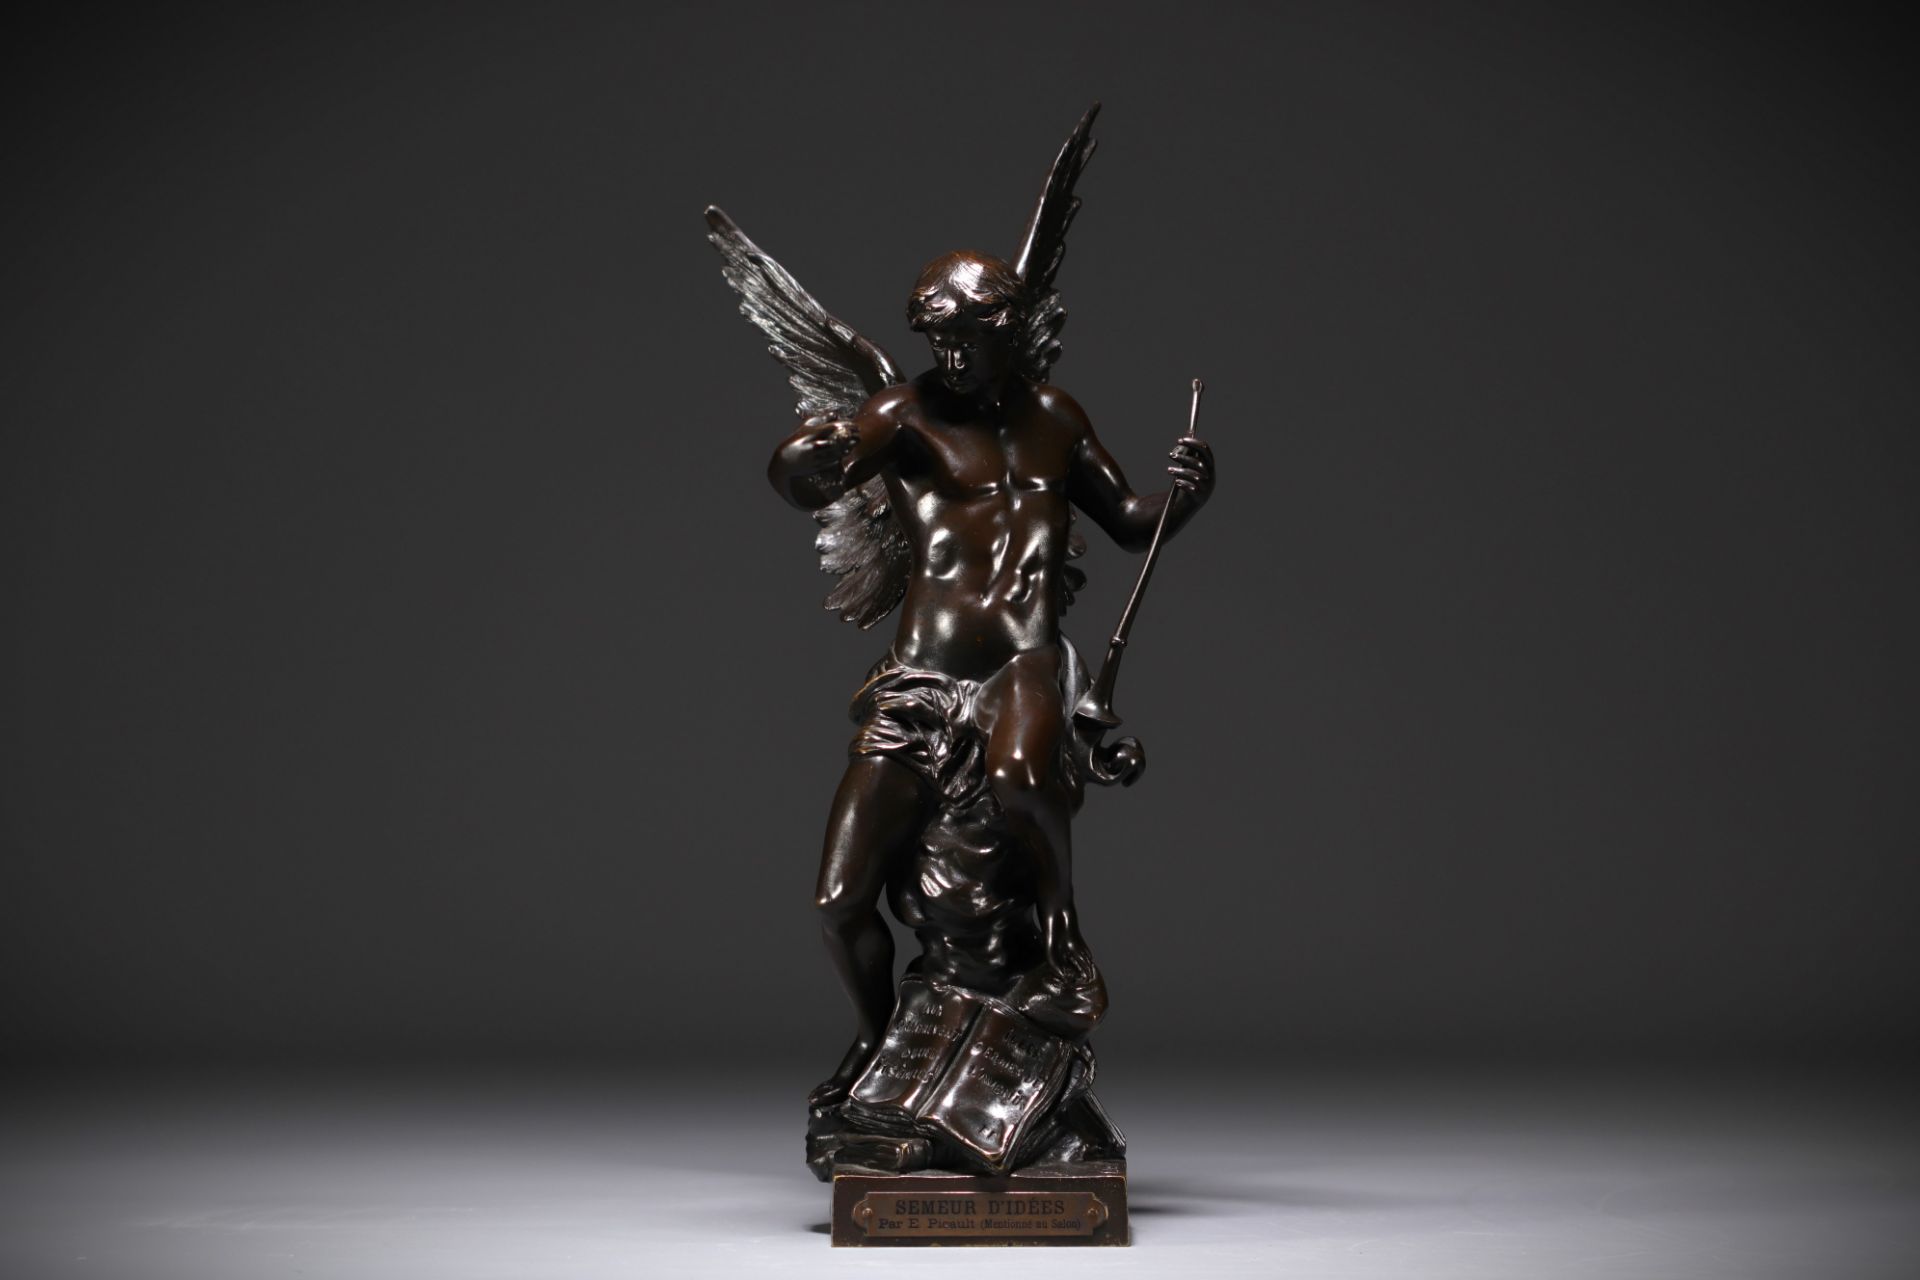 Emile Louis PICAULT (1833-1915) - "The sower of ideas" Bronze with brown patina, late 19th century. - Image 3 of 6